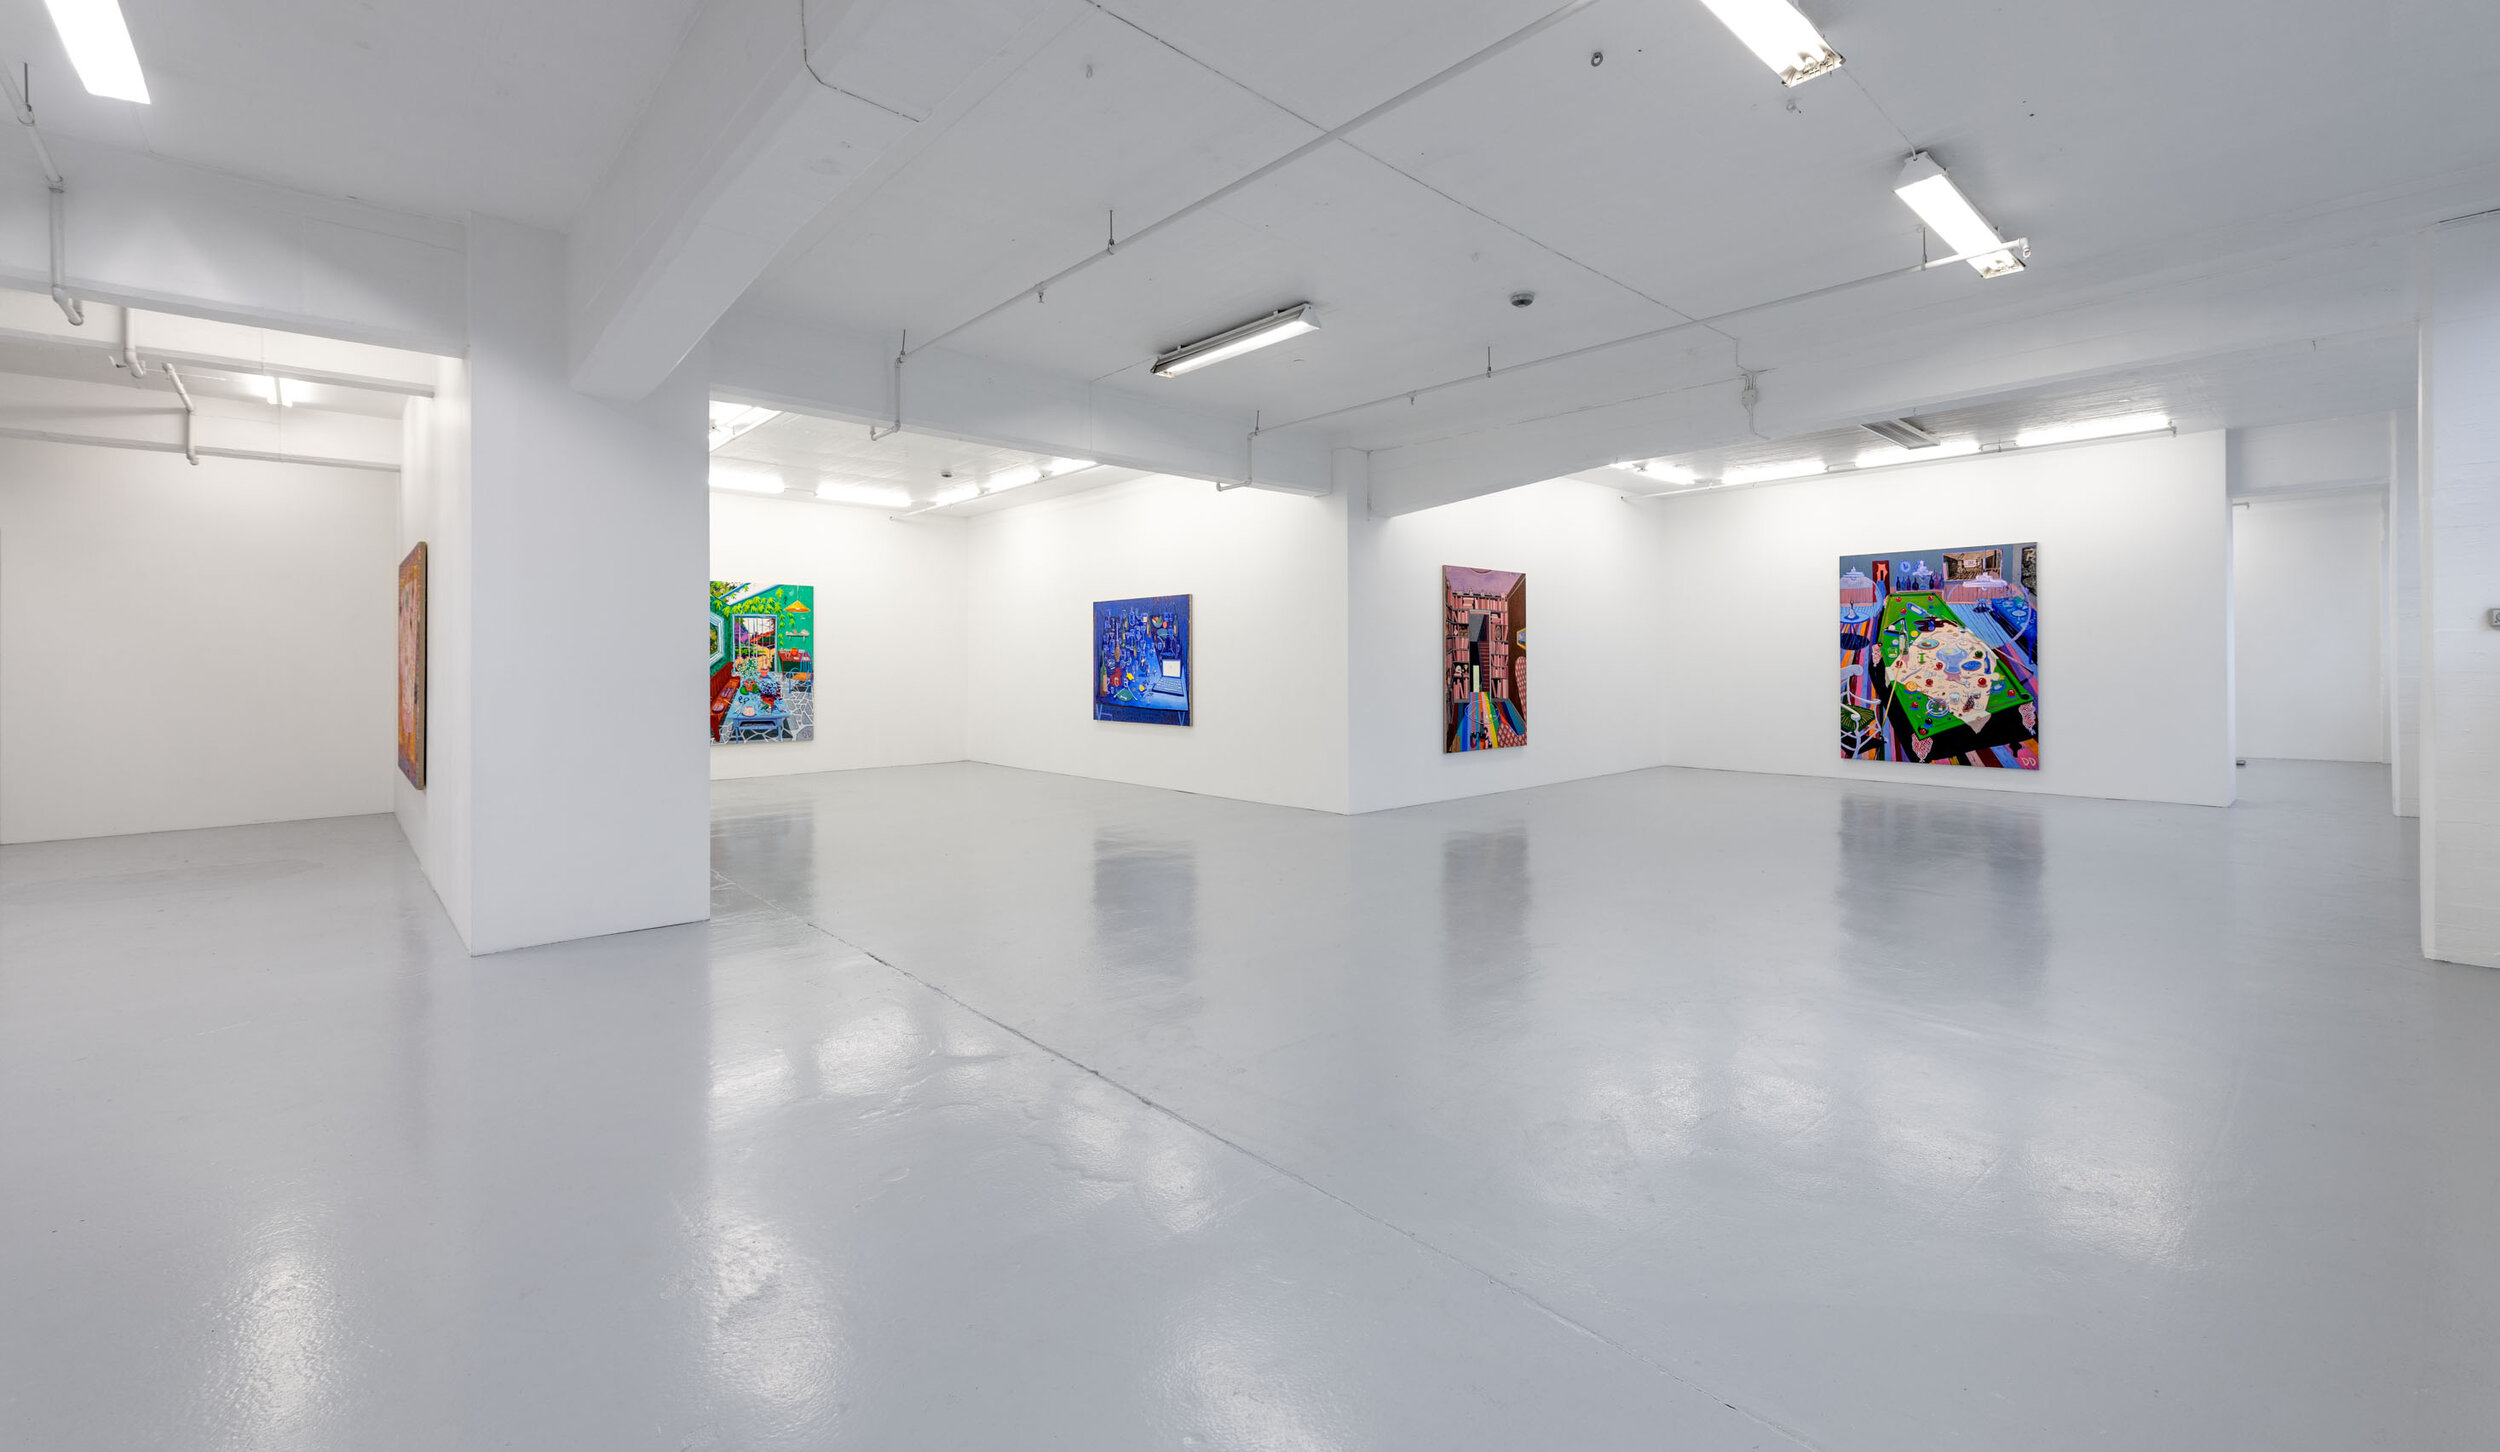  To Be The Key  Installation View  Galleri Opdahl  2019 